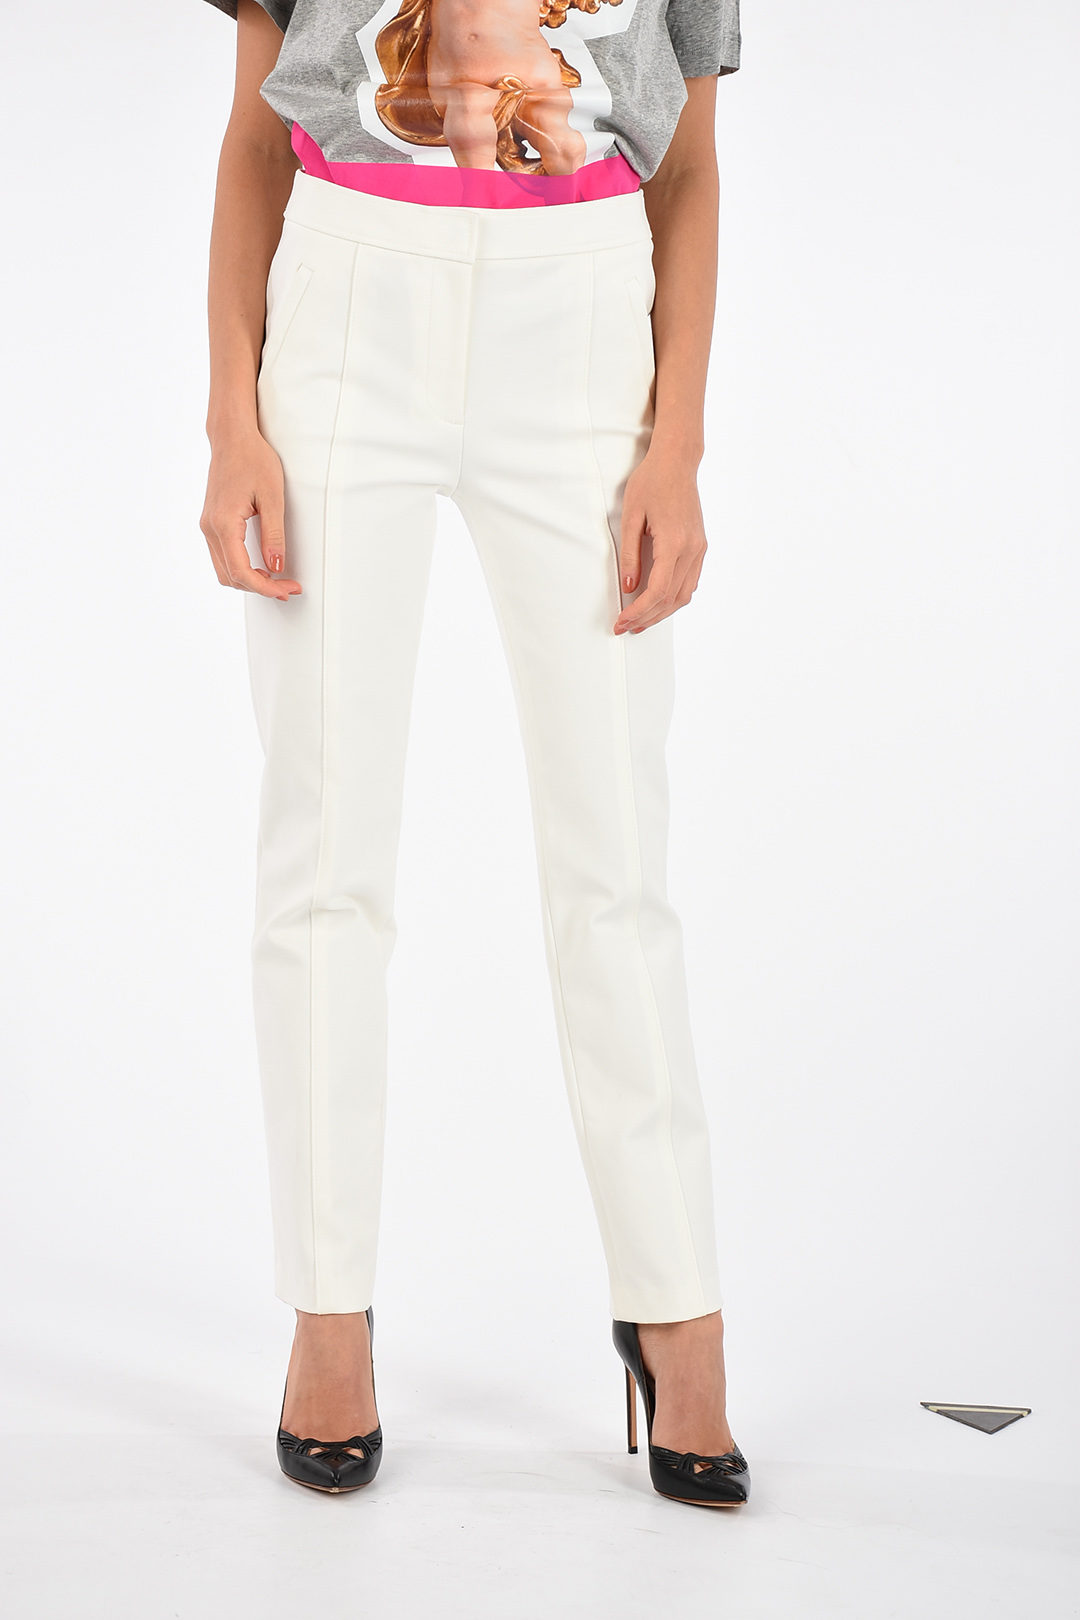 Tory Burch Pants VANNER with Pleat women - Glamood Outlet